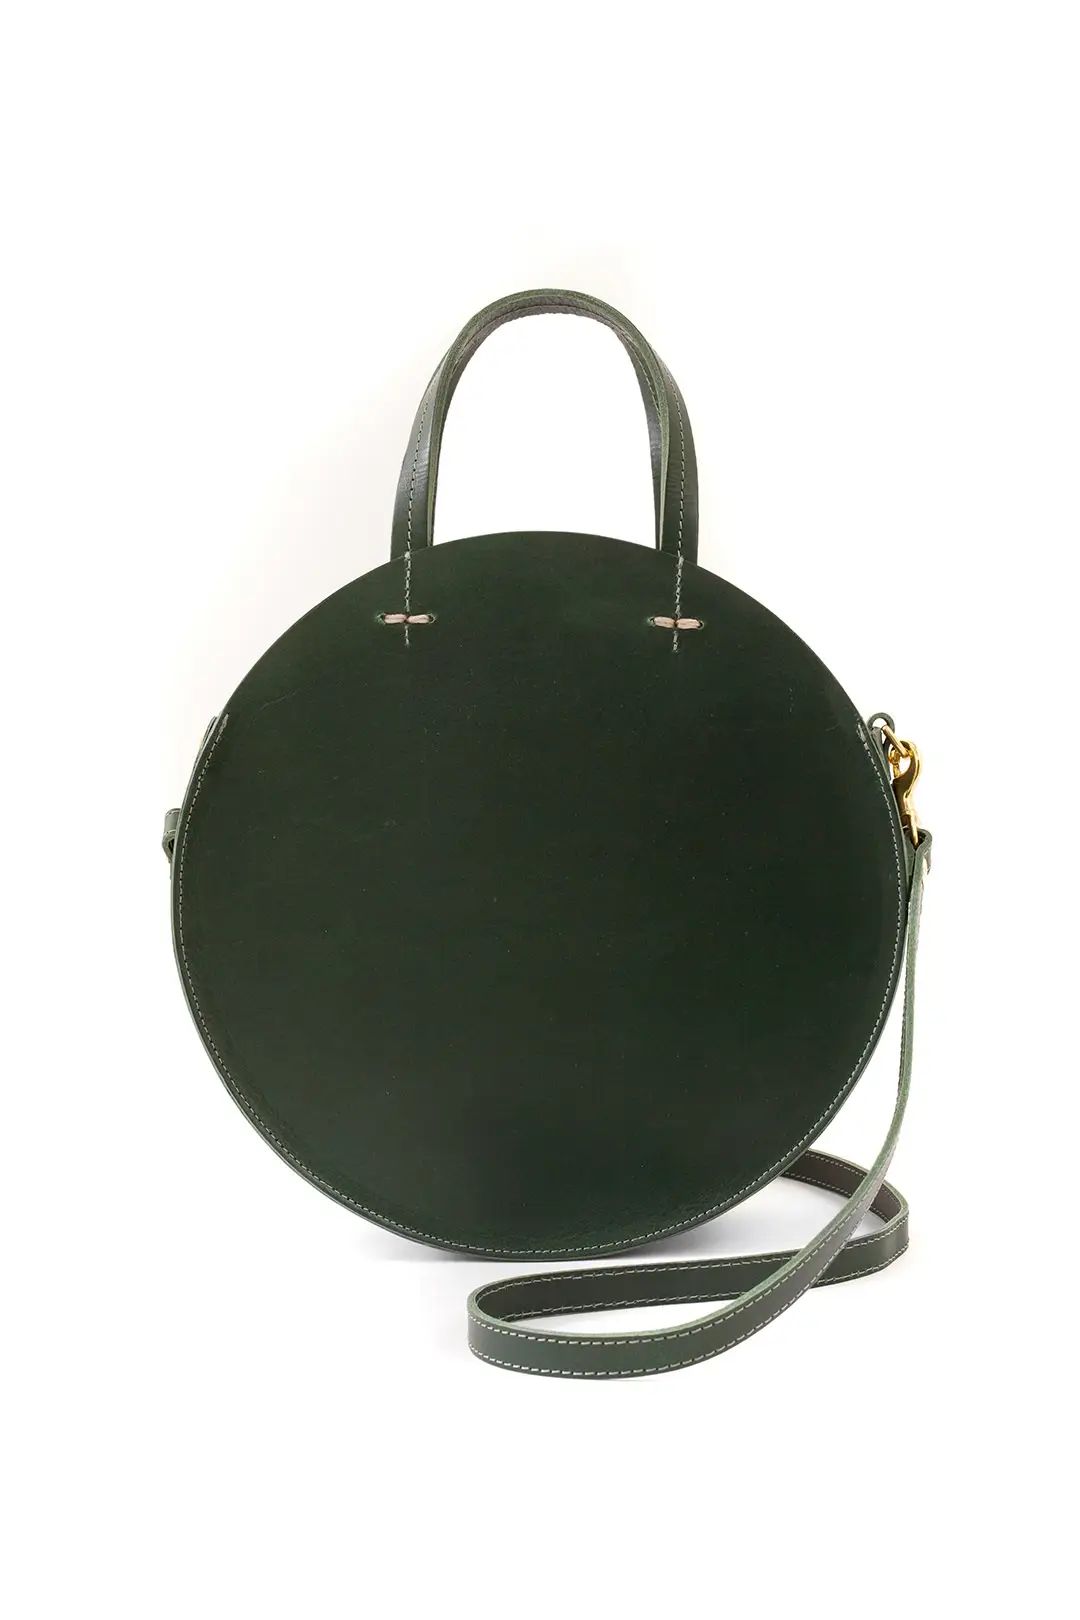 Clare V. Loden Petit Alistair Supreme Bag | Rent The Runway